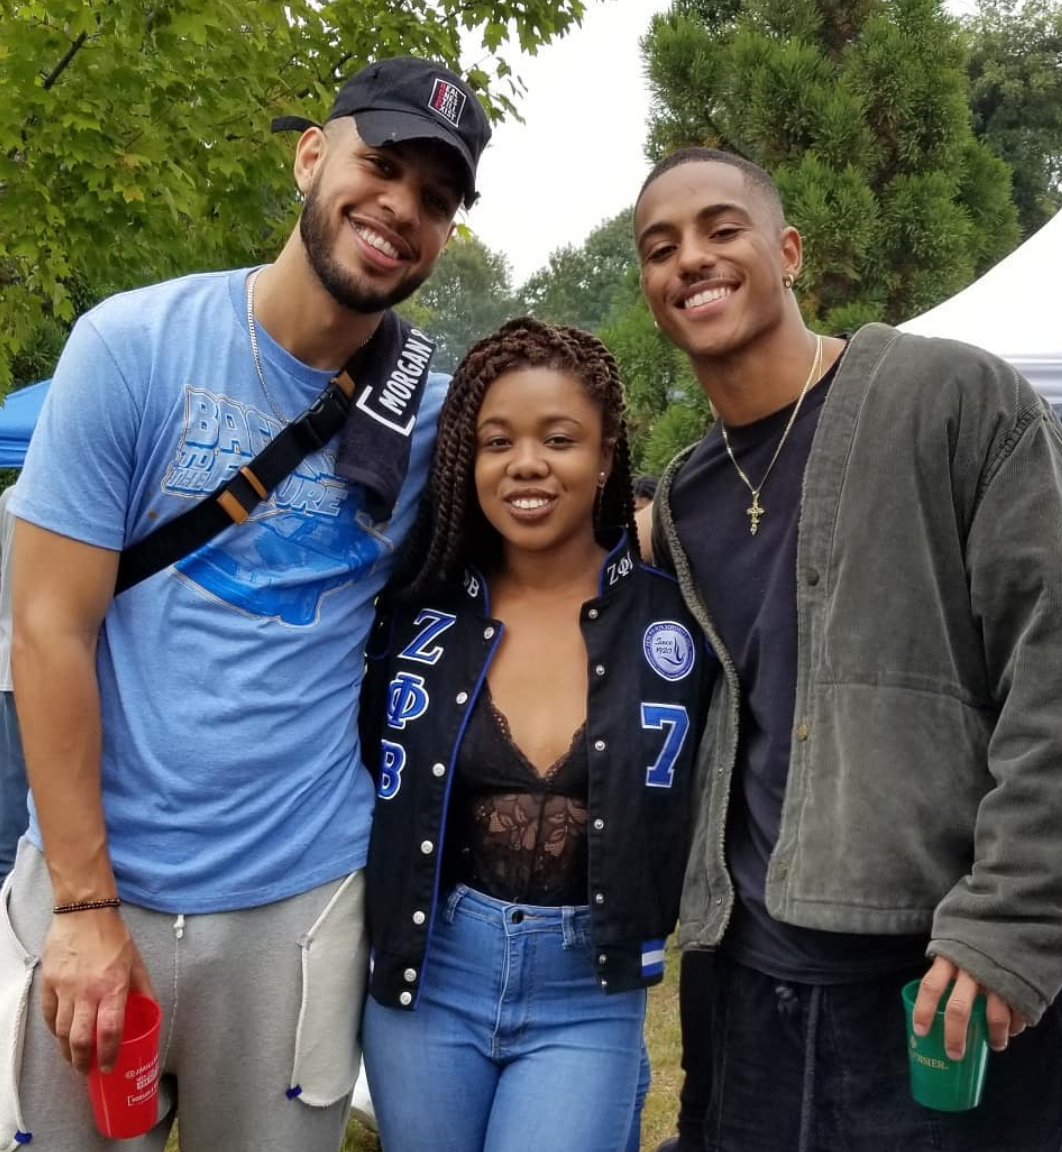 13 Photos That Prove Going to SpelHouse Homecoming Is The Best Decision You'll Ever Make